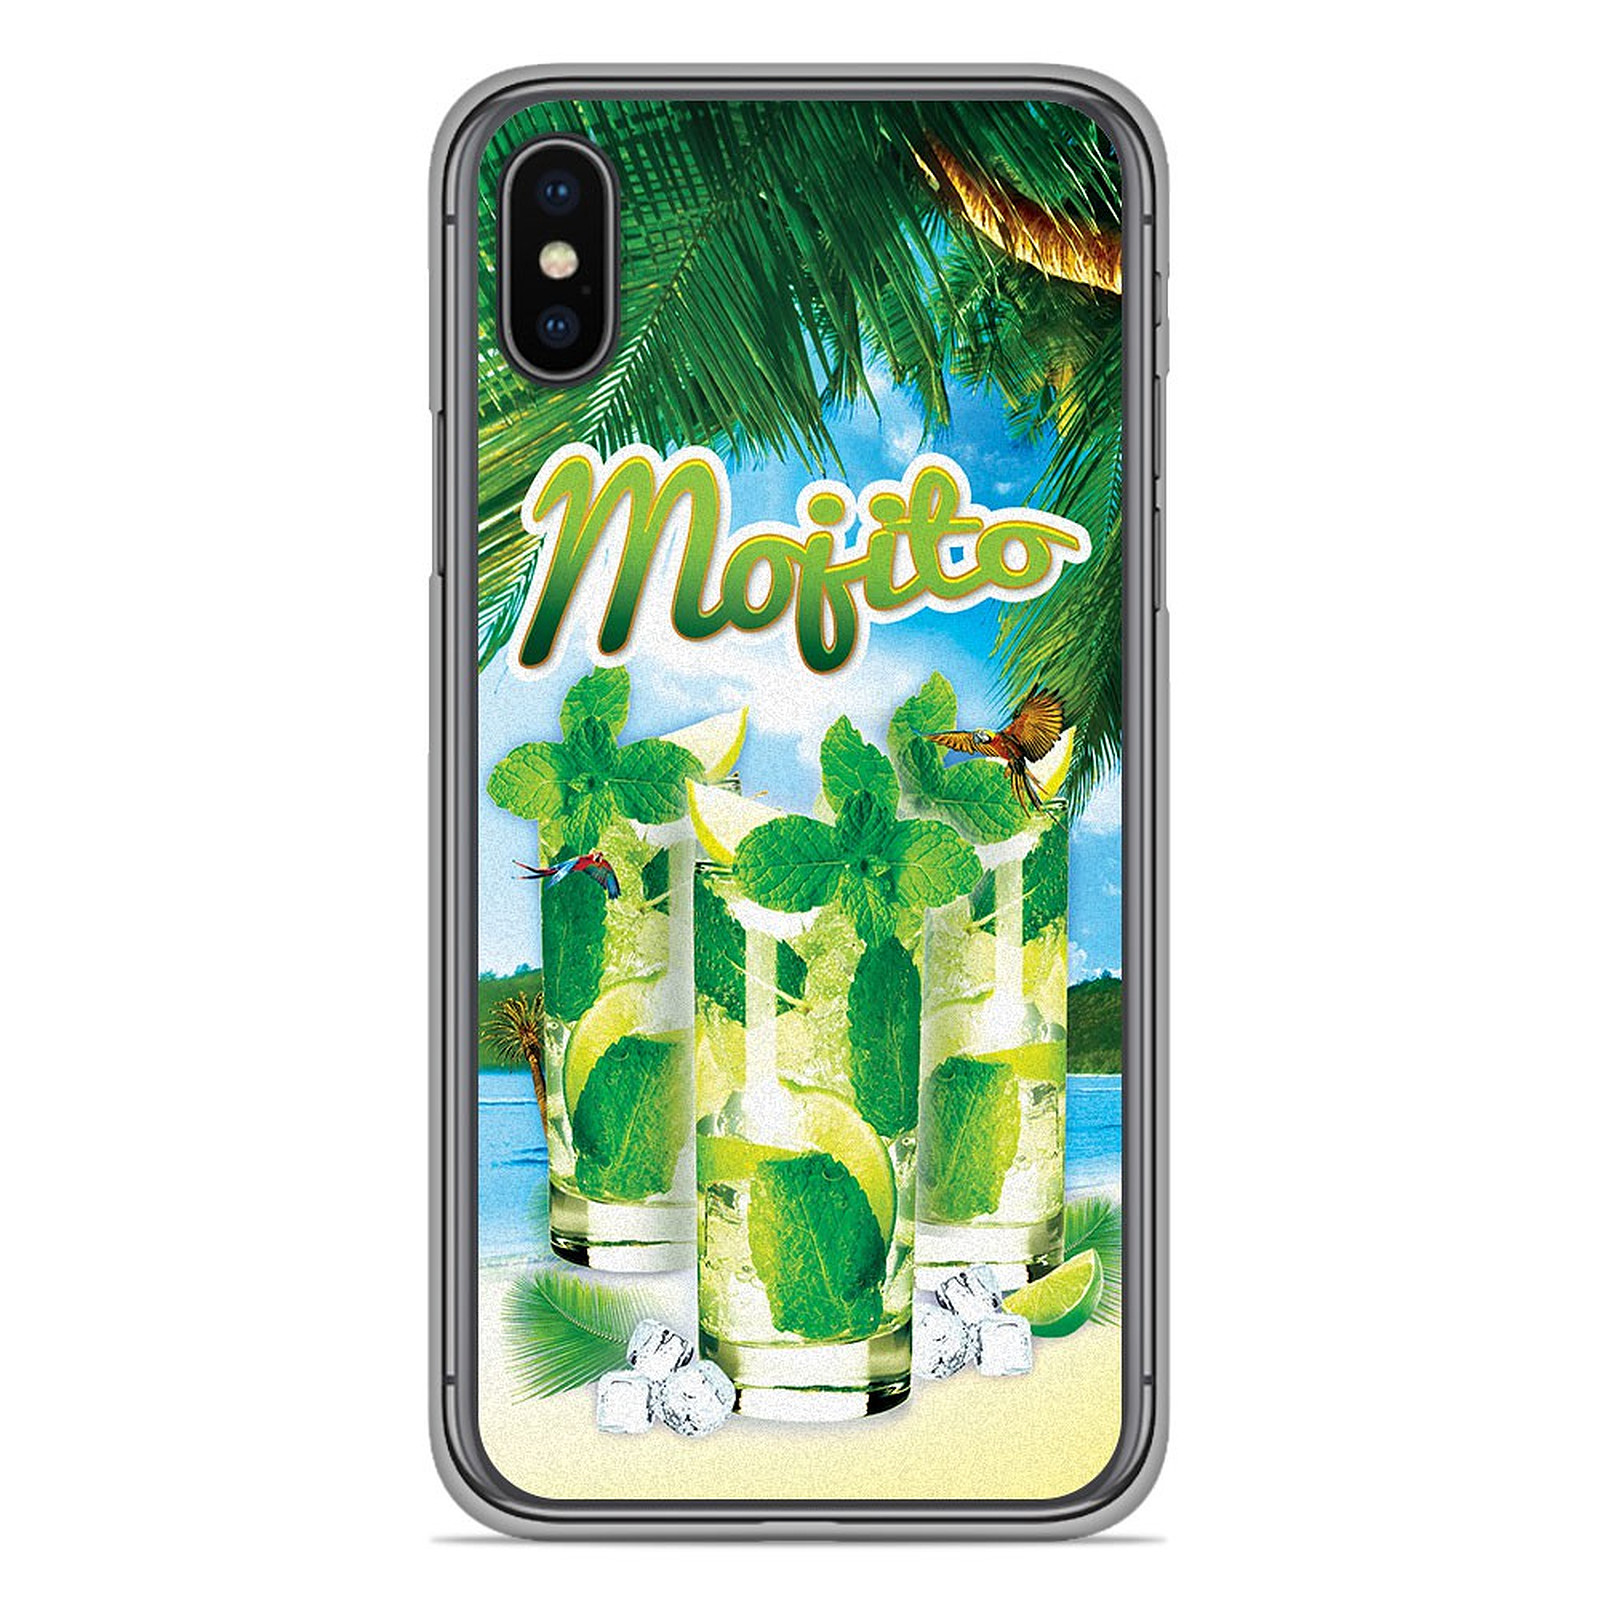 1001 Coques Coque silicone gel Apple iPhone X / XS motif Mojito Plage - Coque telephone 1001Coques